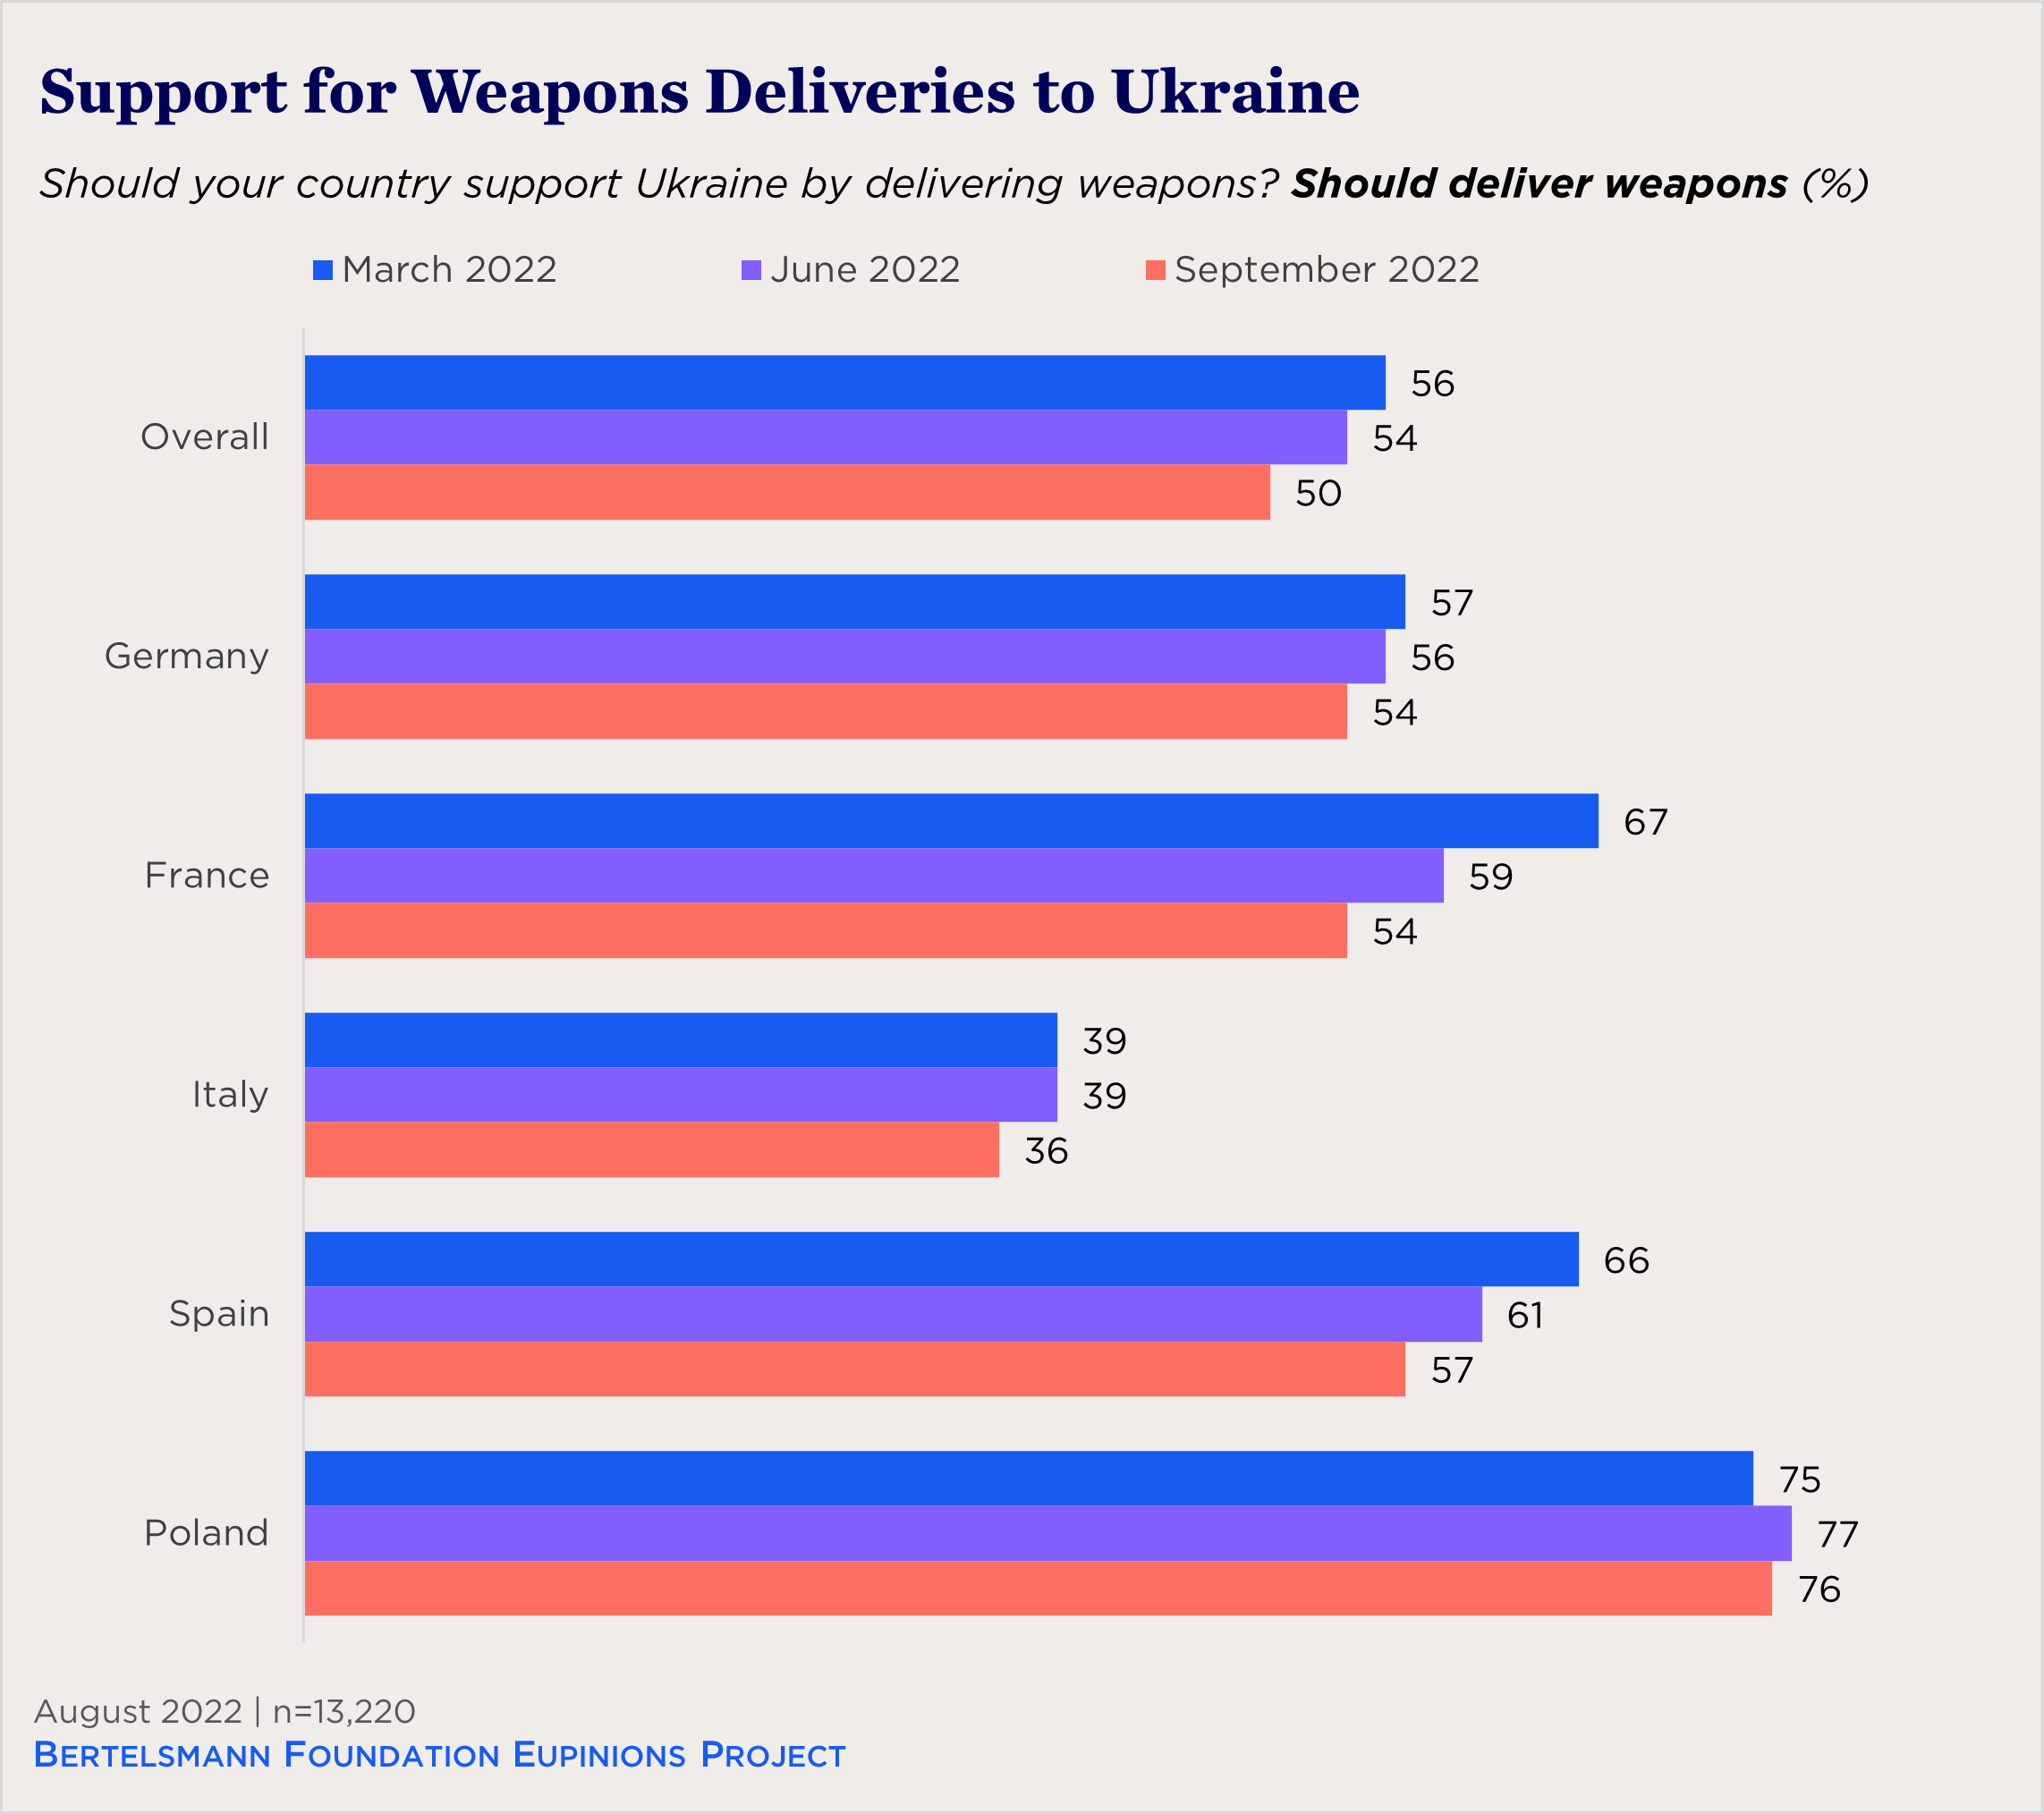 "bar chart showing support for weapons deliveries to Ukraine by country over time"